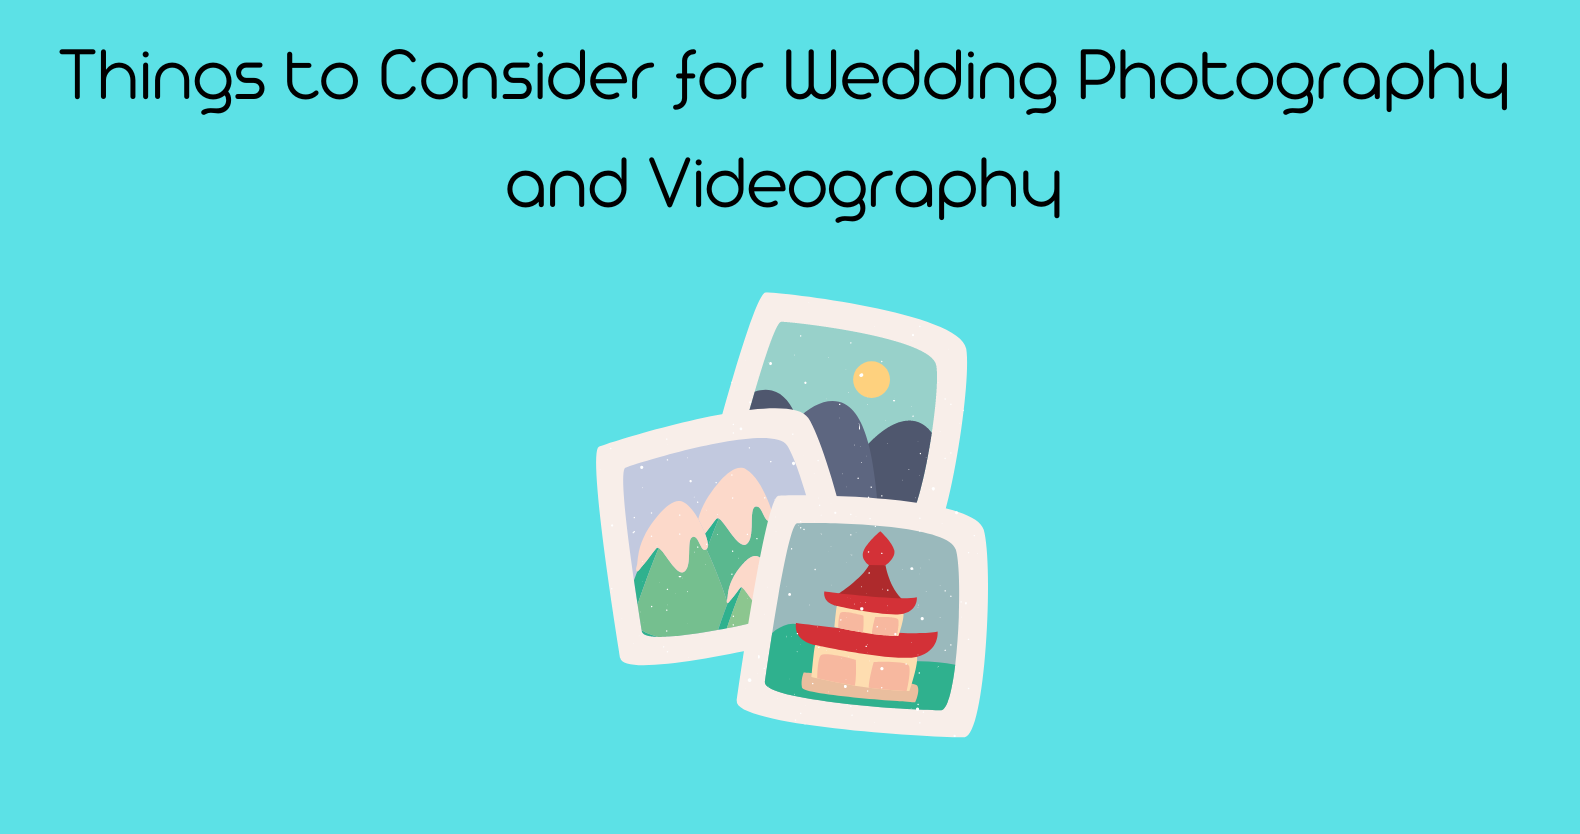 Things to Consider for Wedding Photography and Videography